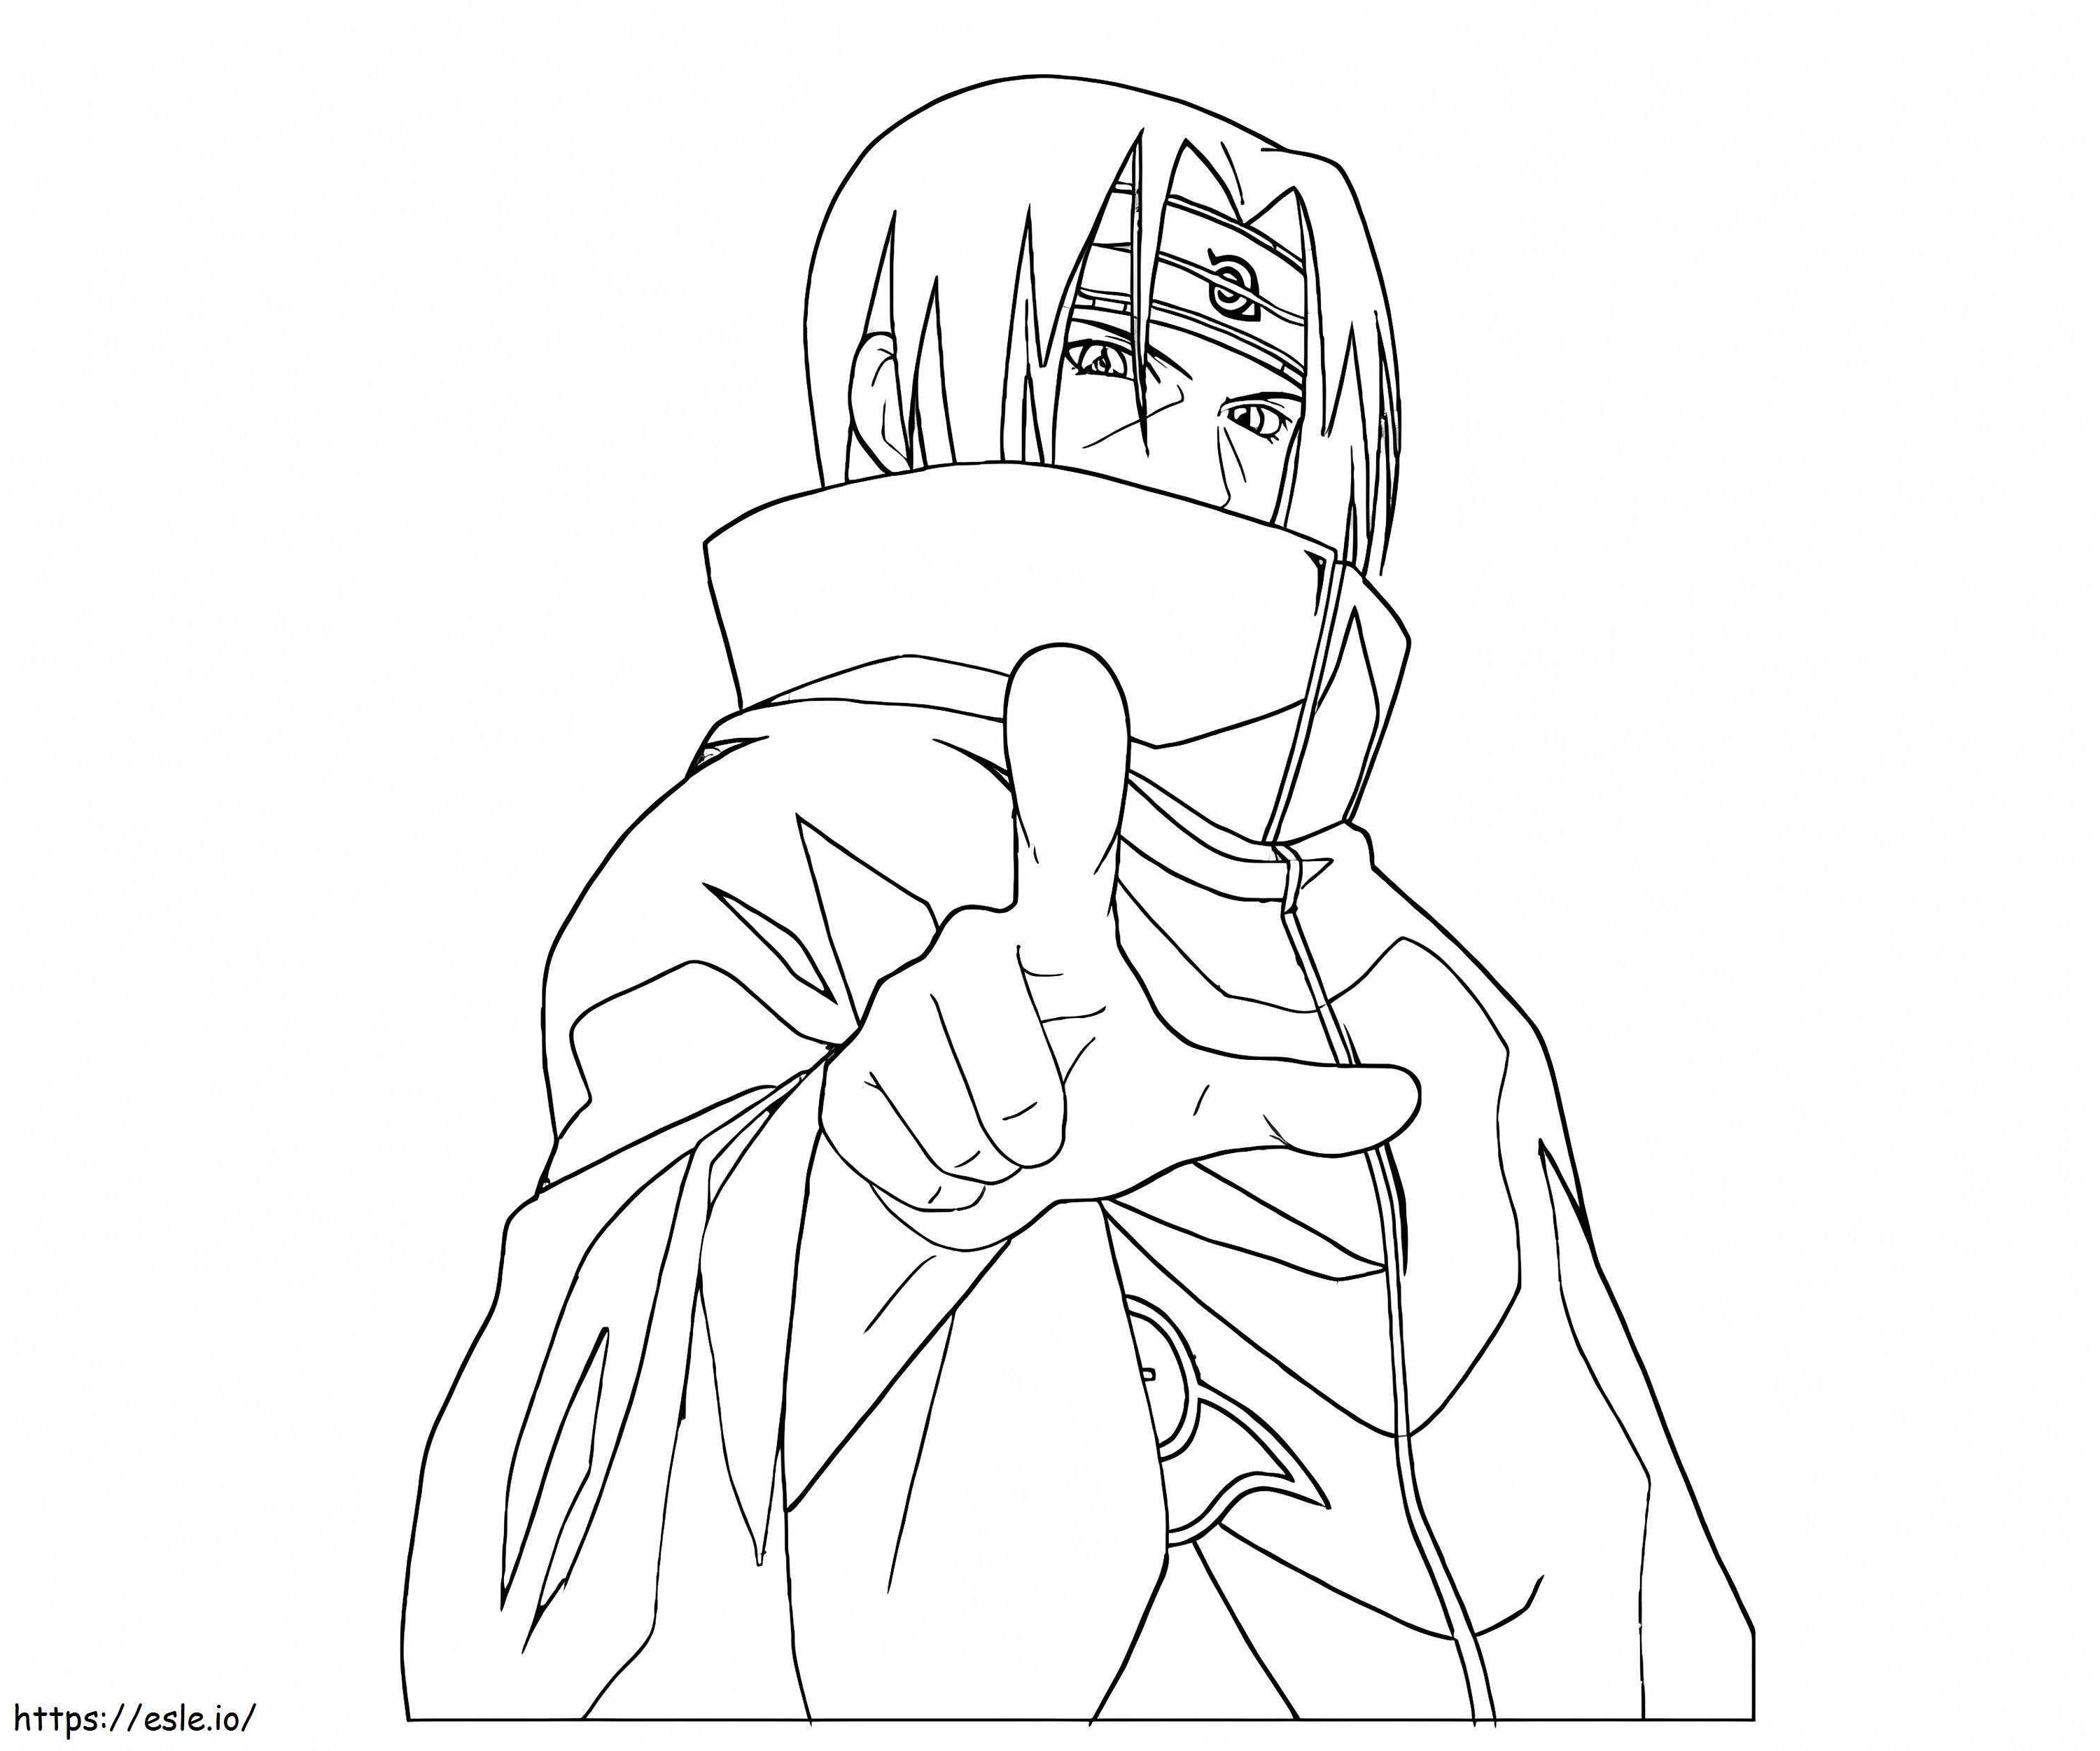 Amazing Itachi coloring page